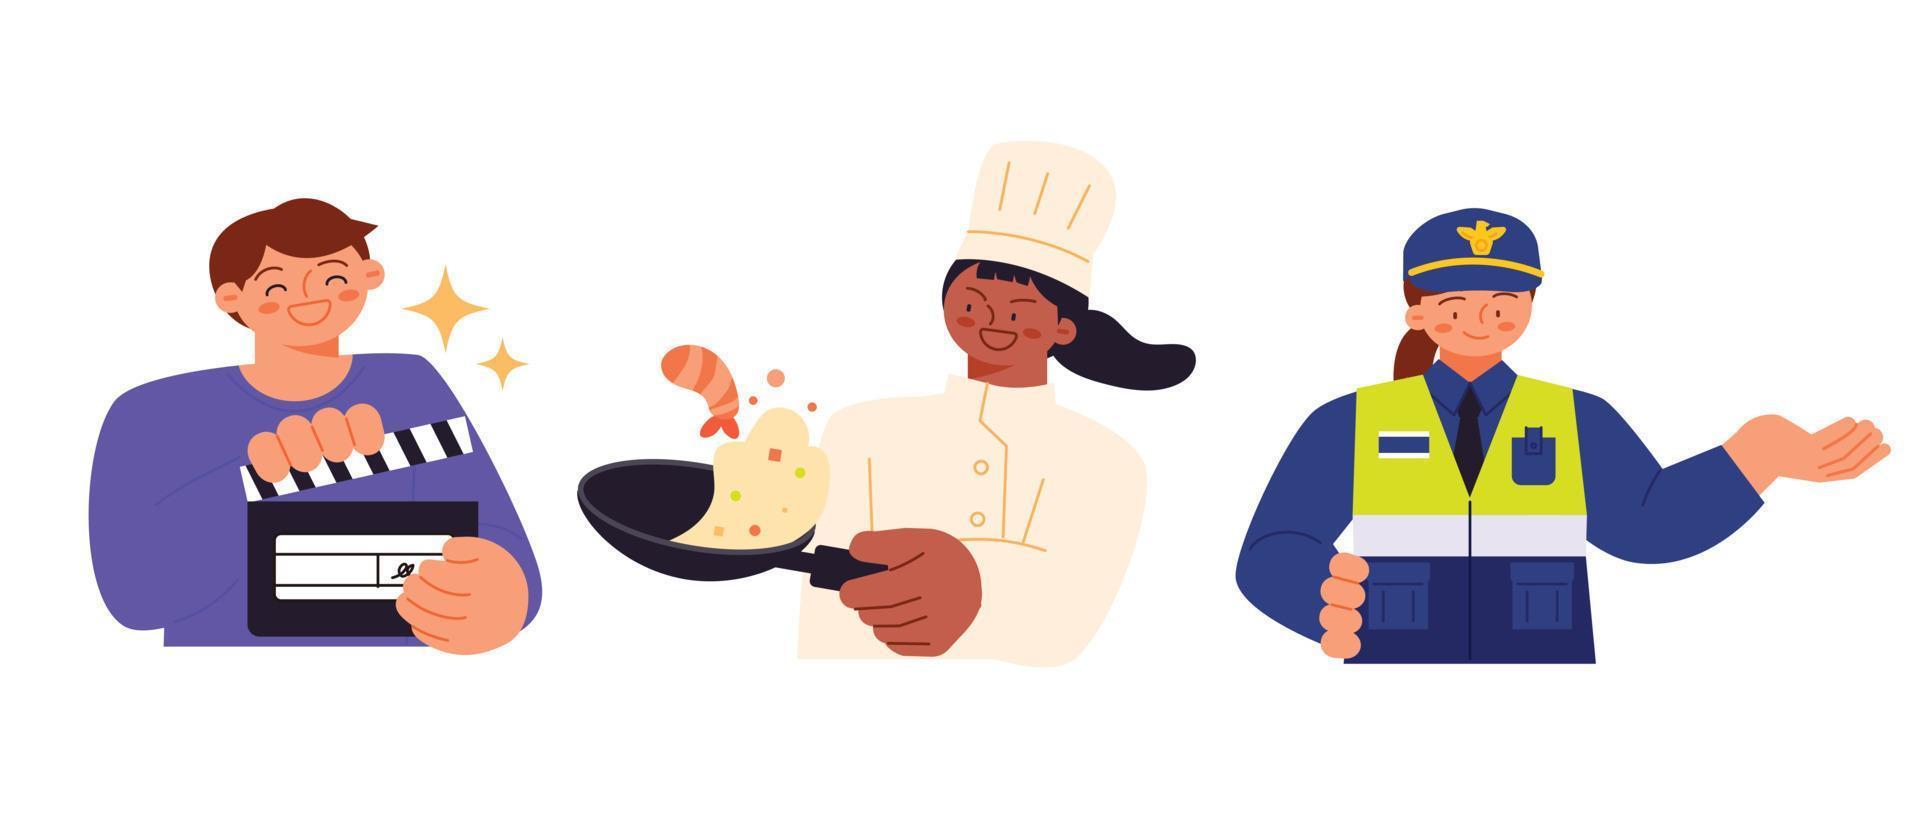 Labor Day. people who are working. A character in a uniform. Film staff, cooks, cops. vector